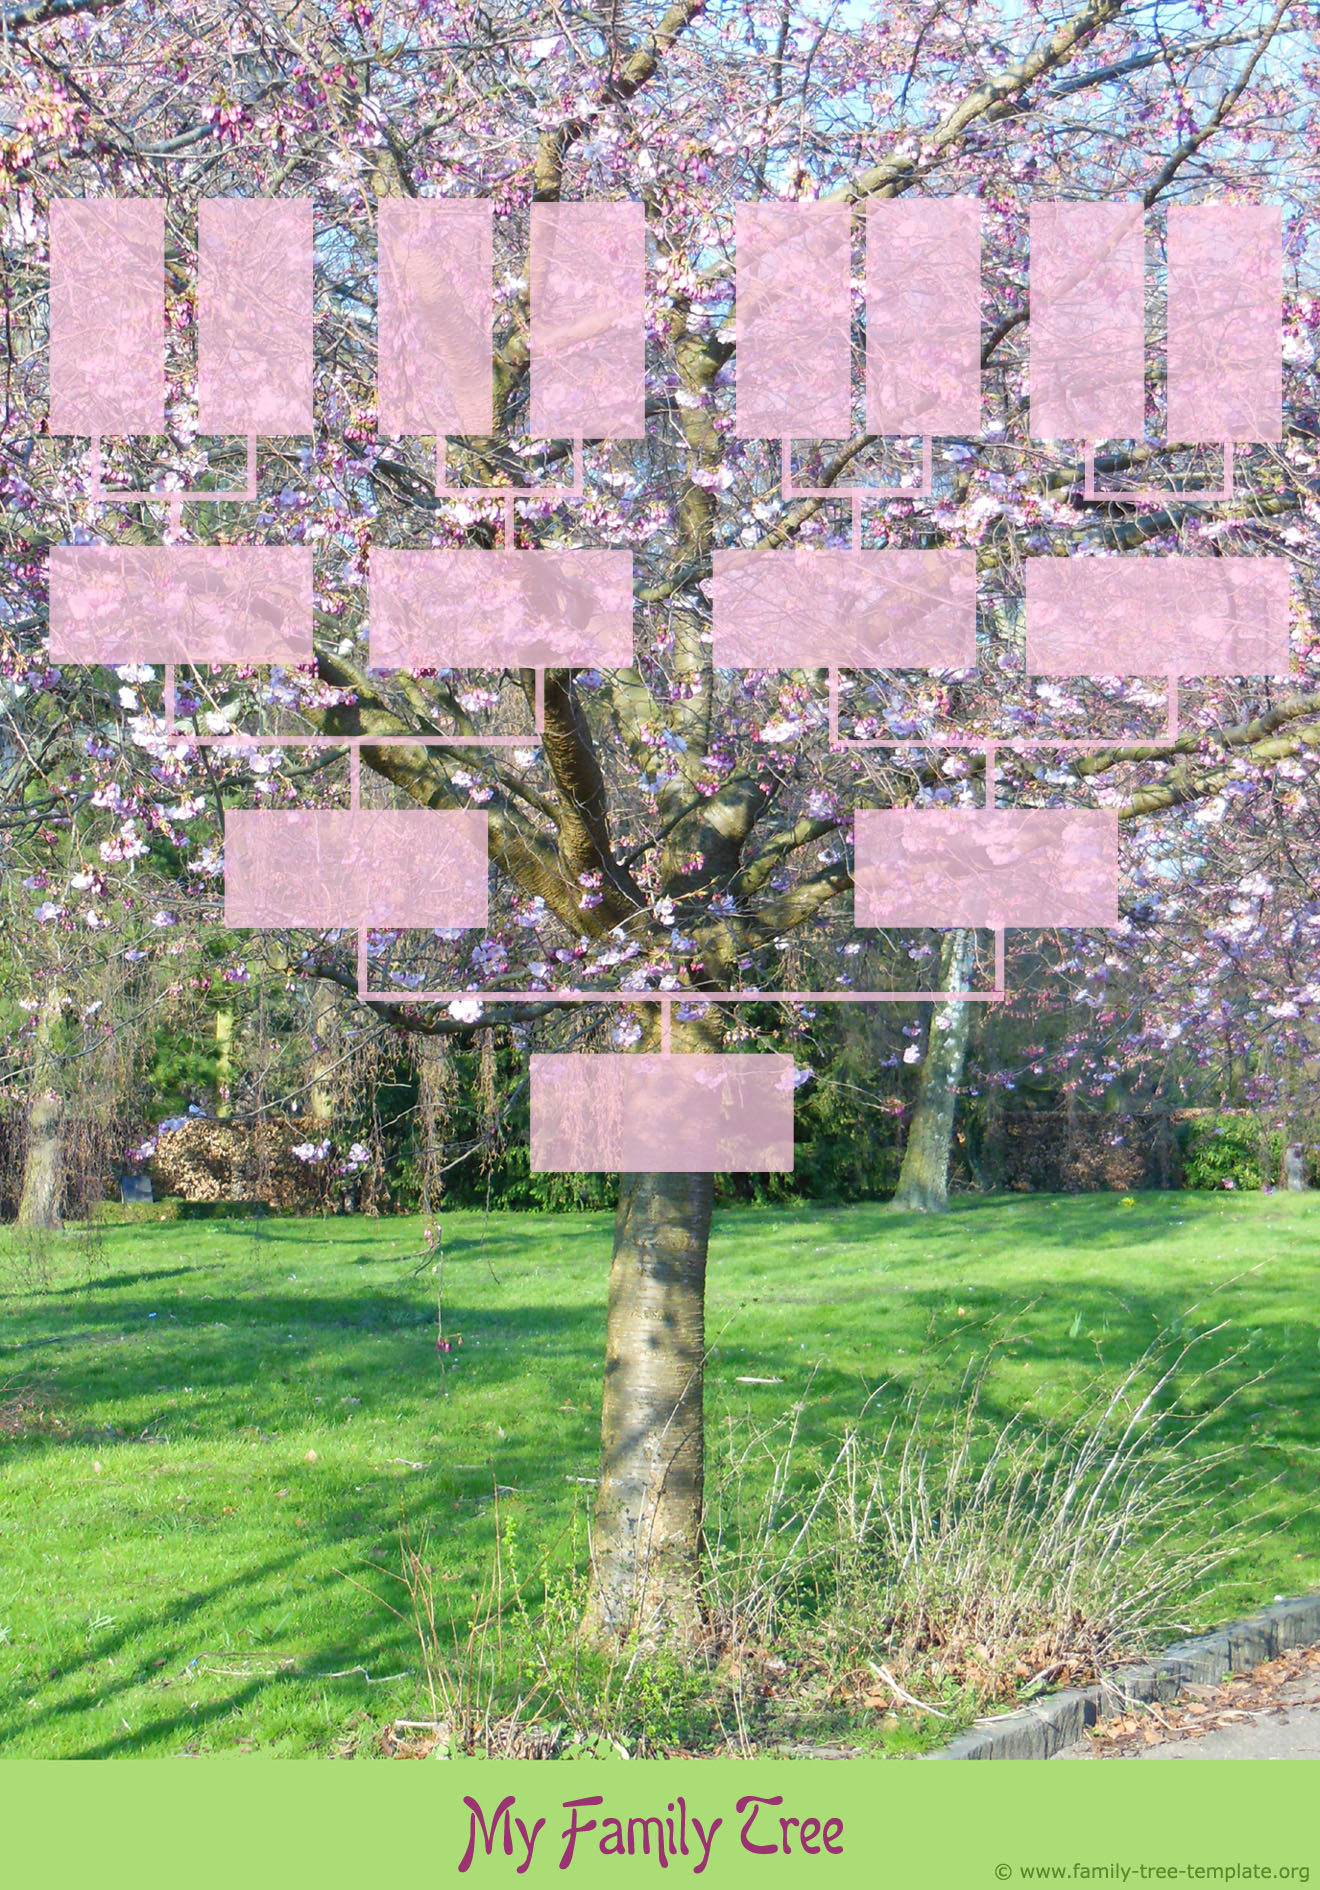 Printable family tree template design. Spring tree with small pink flowers.